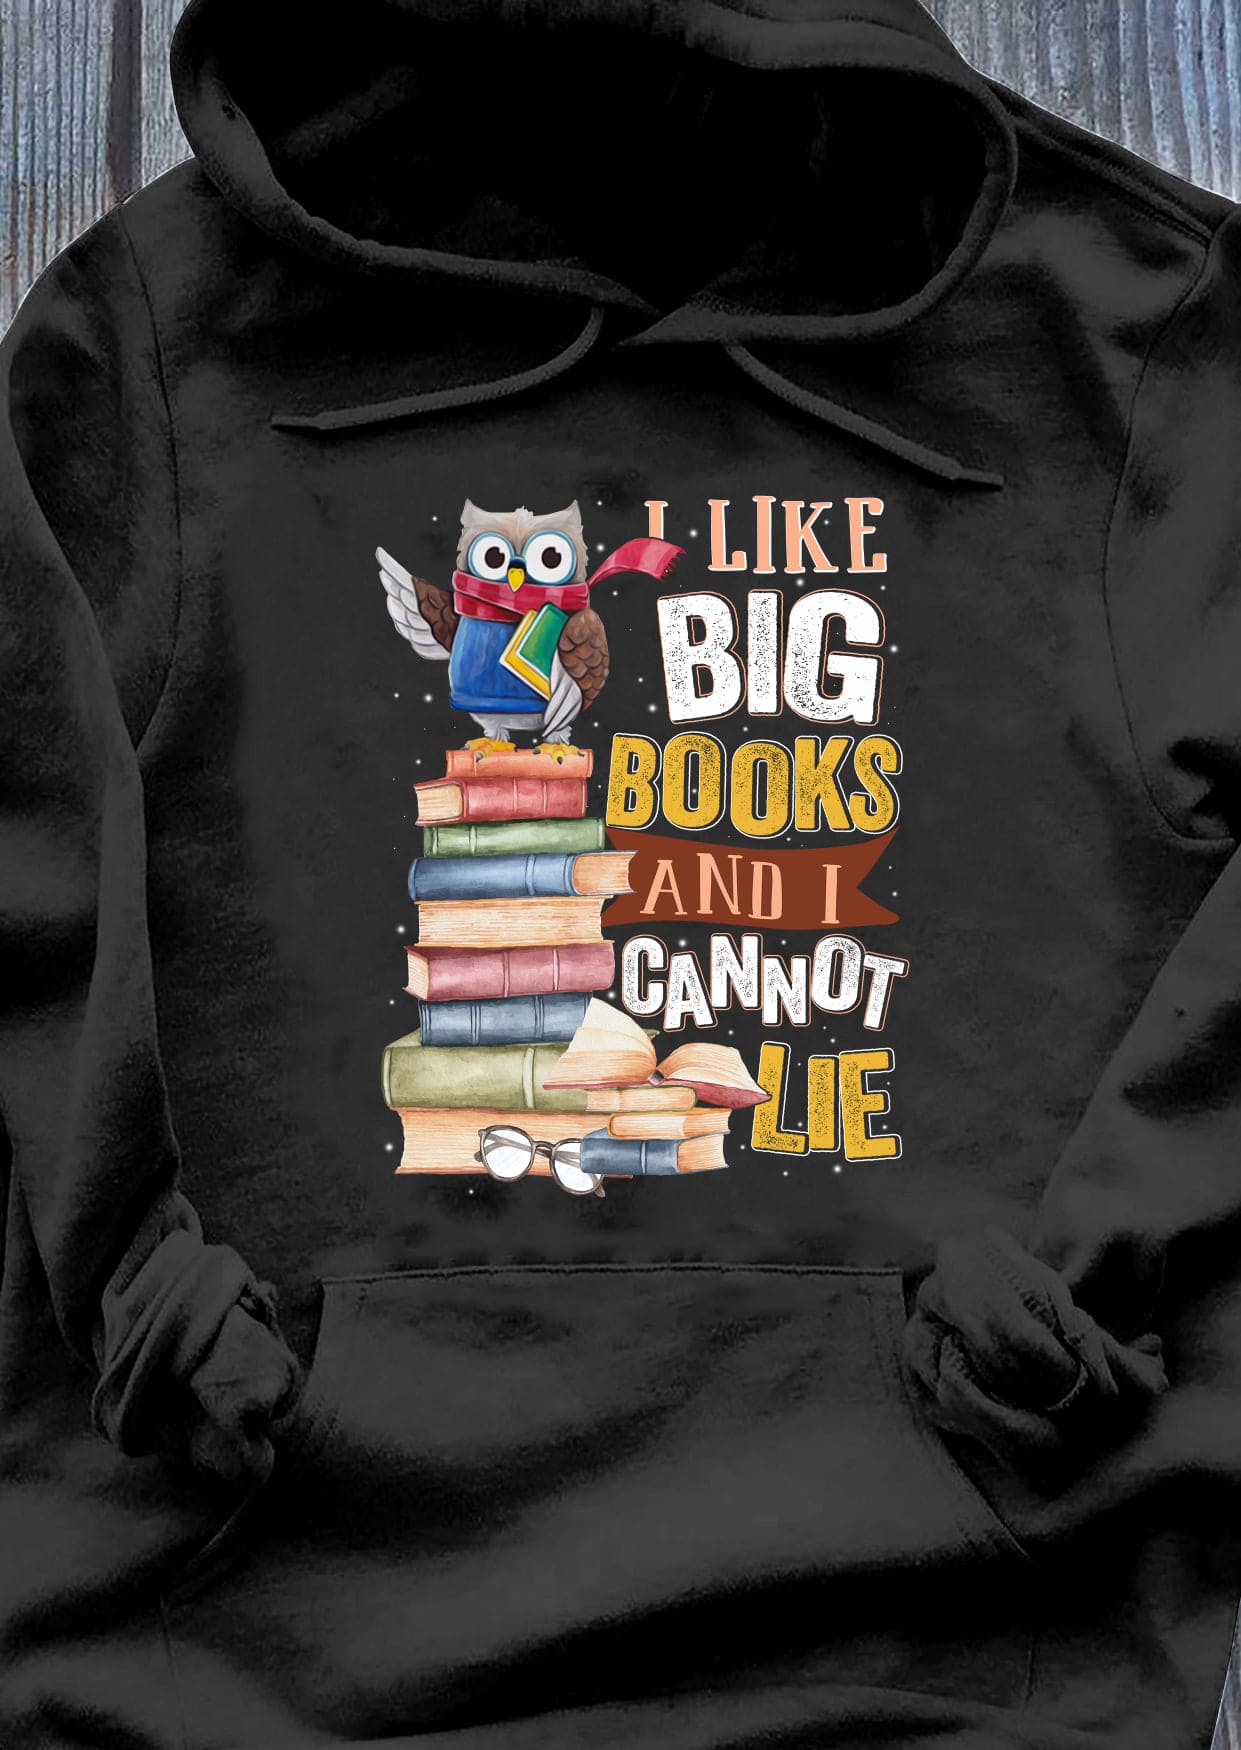 I like big books and I cannot lie - Owl and books, Book reader T-shirt, reading the hobby